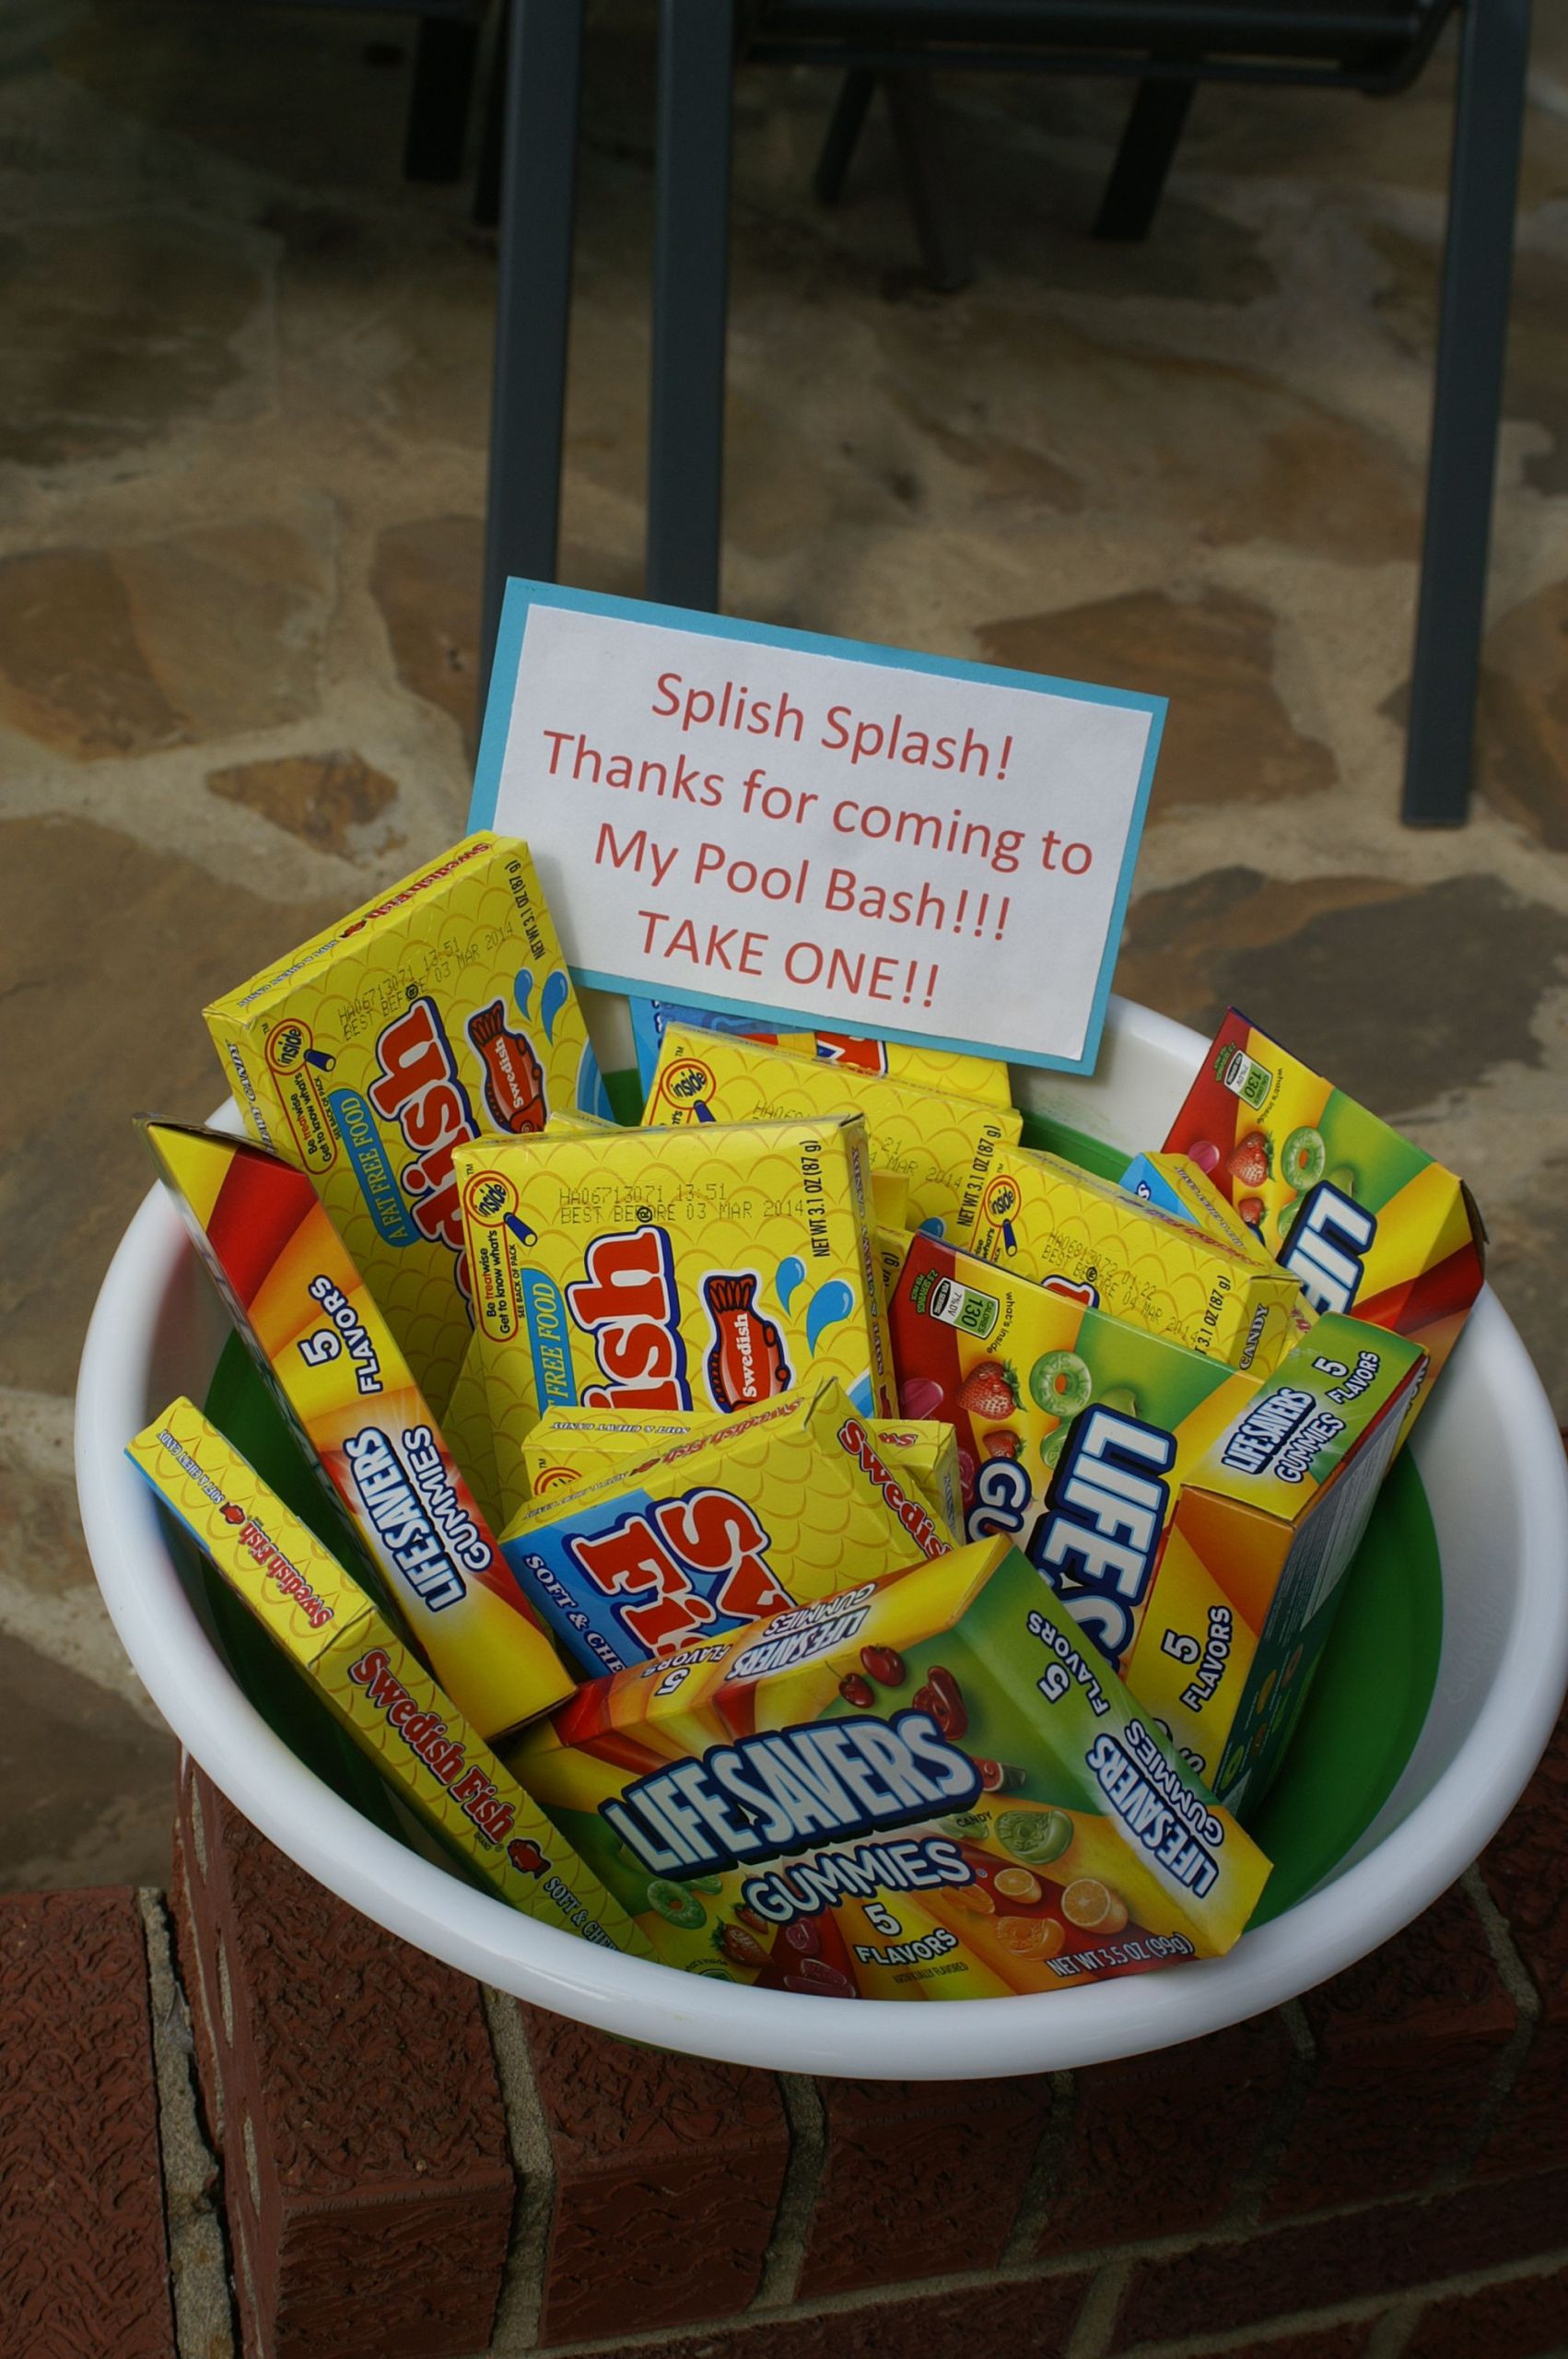 Kids Pool Party Favor Ideas
 party favors for pool beach party eping it simple